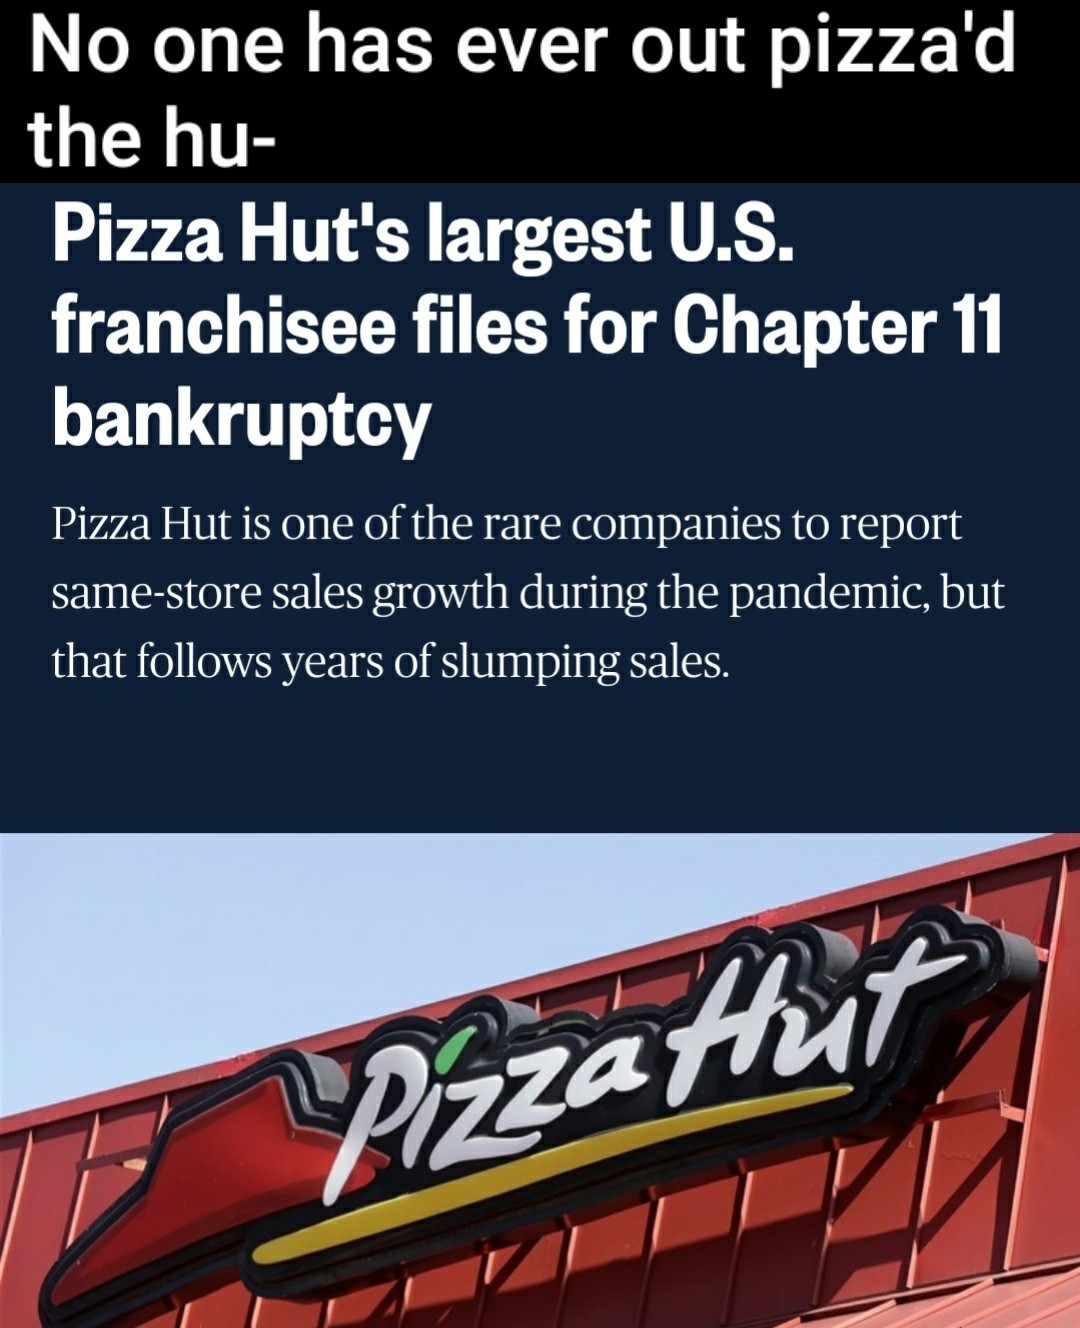 No one can out pizza the hut if it doesnt exist - meme